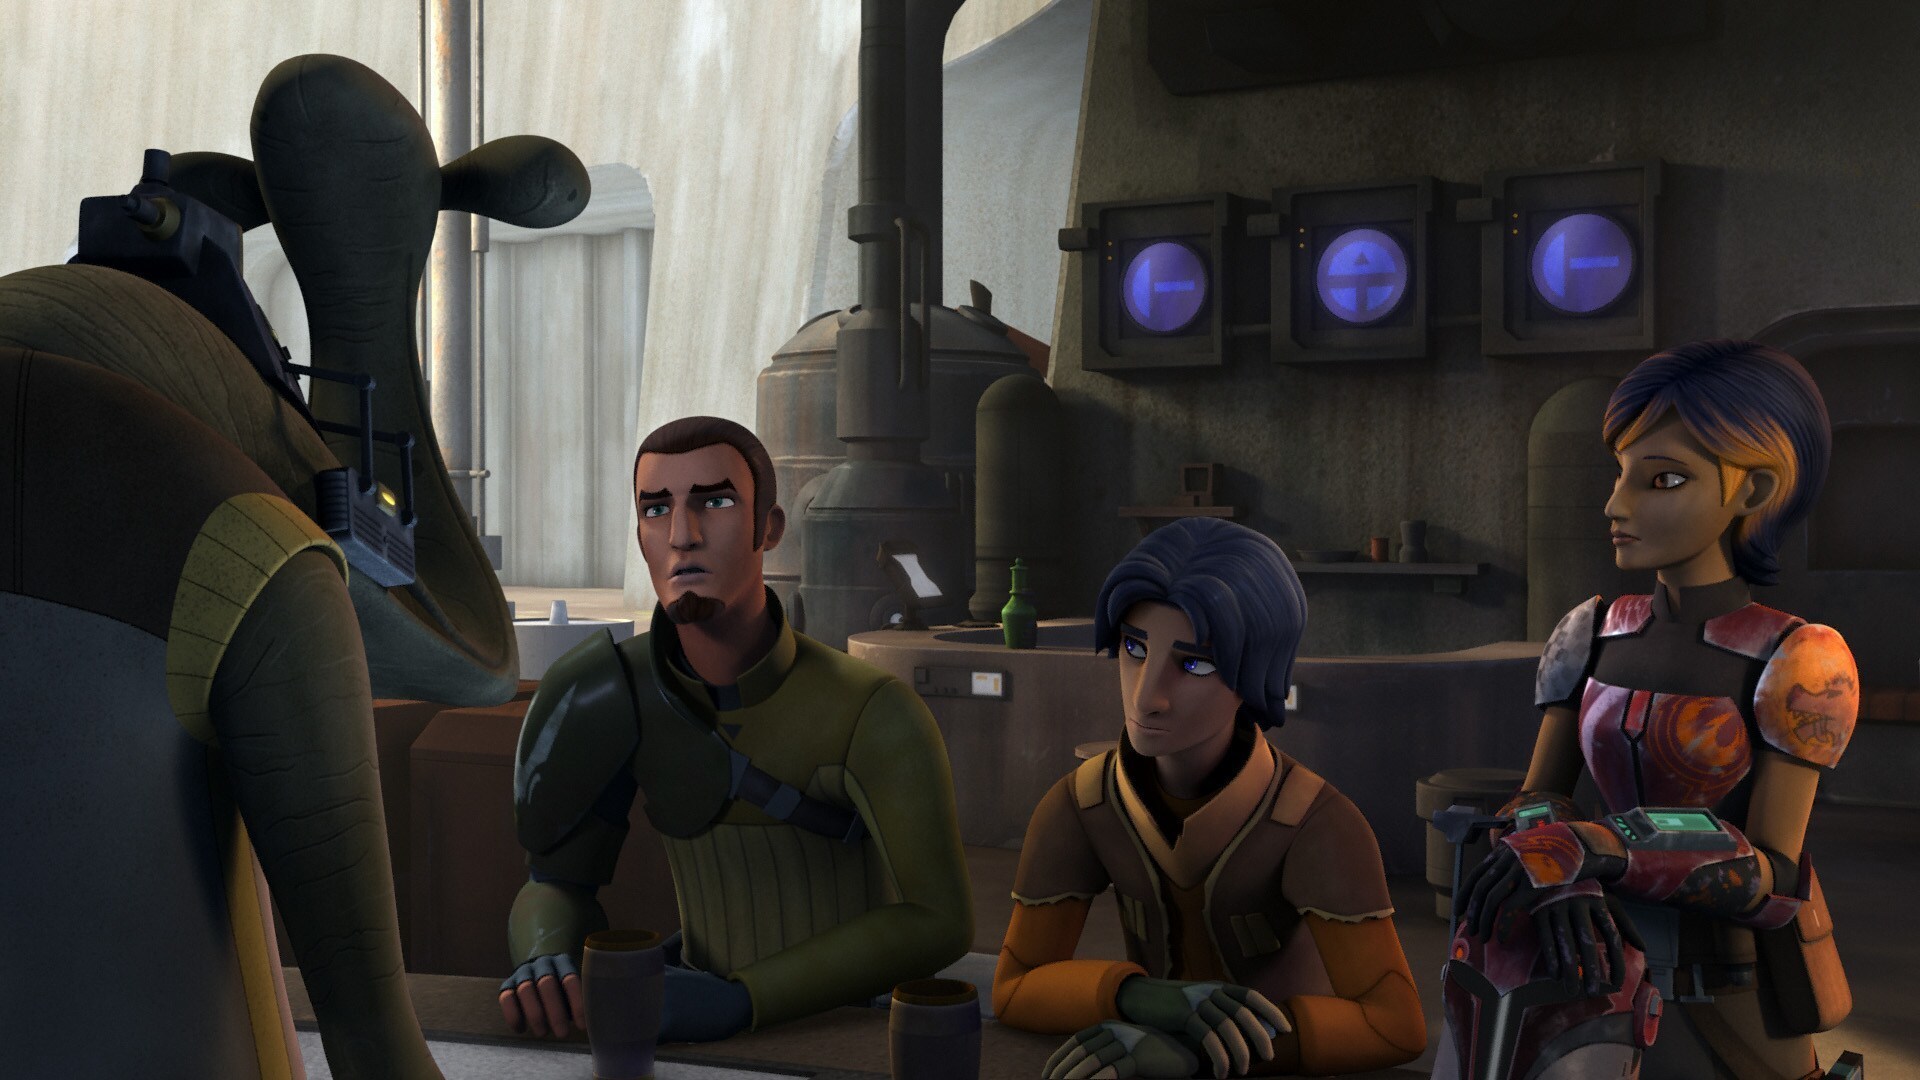 The Ghost crew in Star Wars Rebels – “Empire Day”